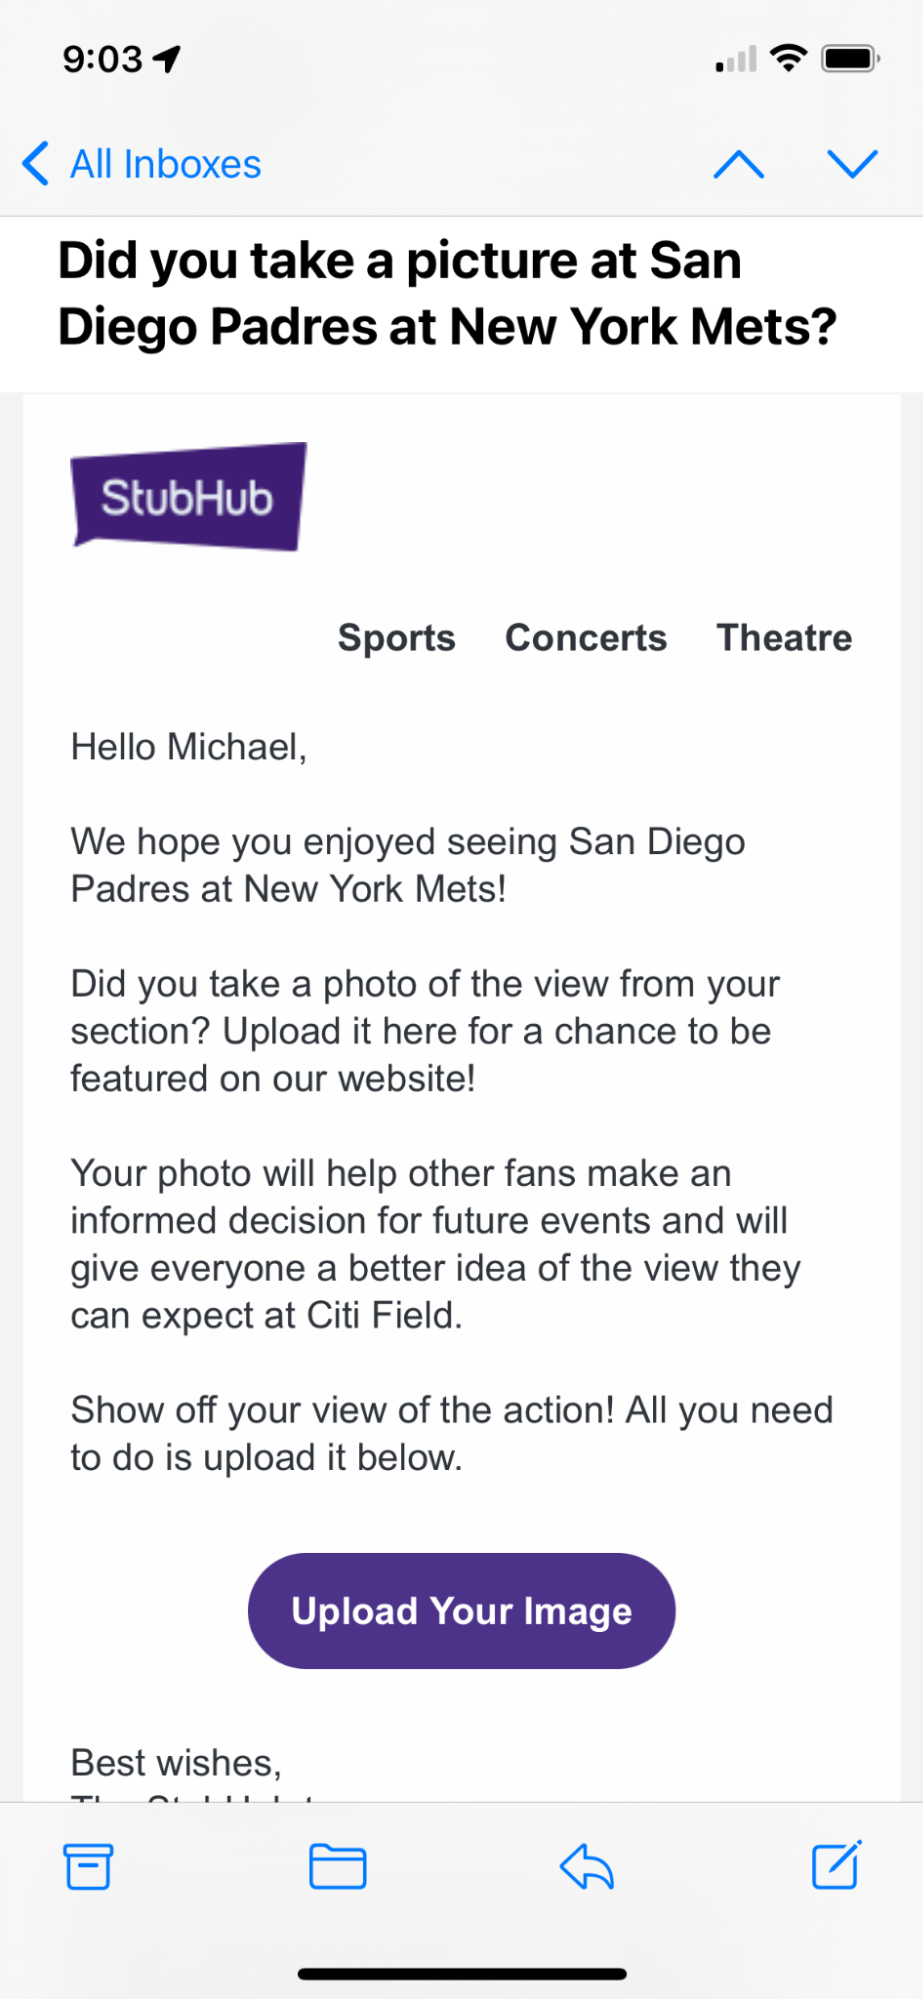 Screenshot of message, “Did you take a picture at San Diego Padres at New York Mets?” and instructions for uploading.